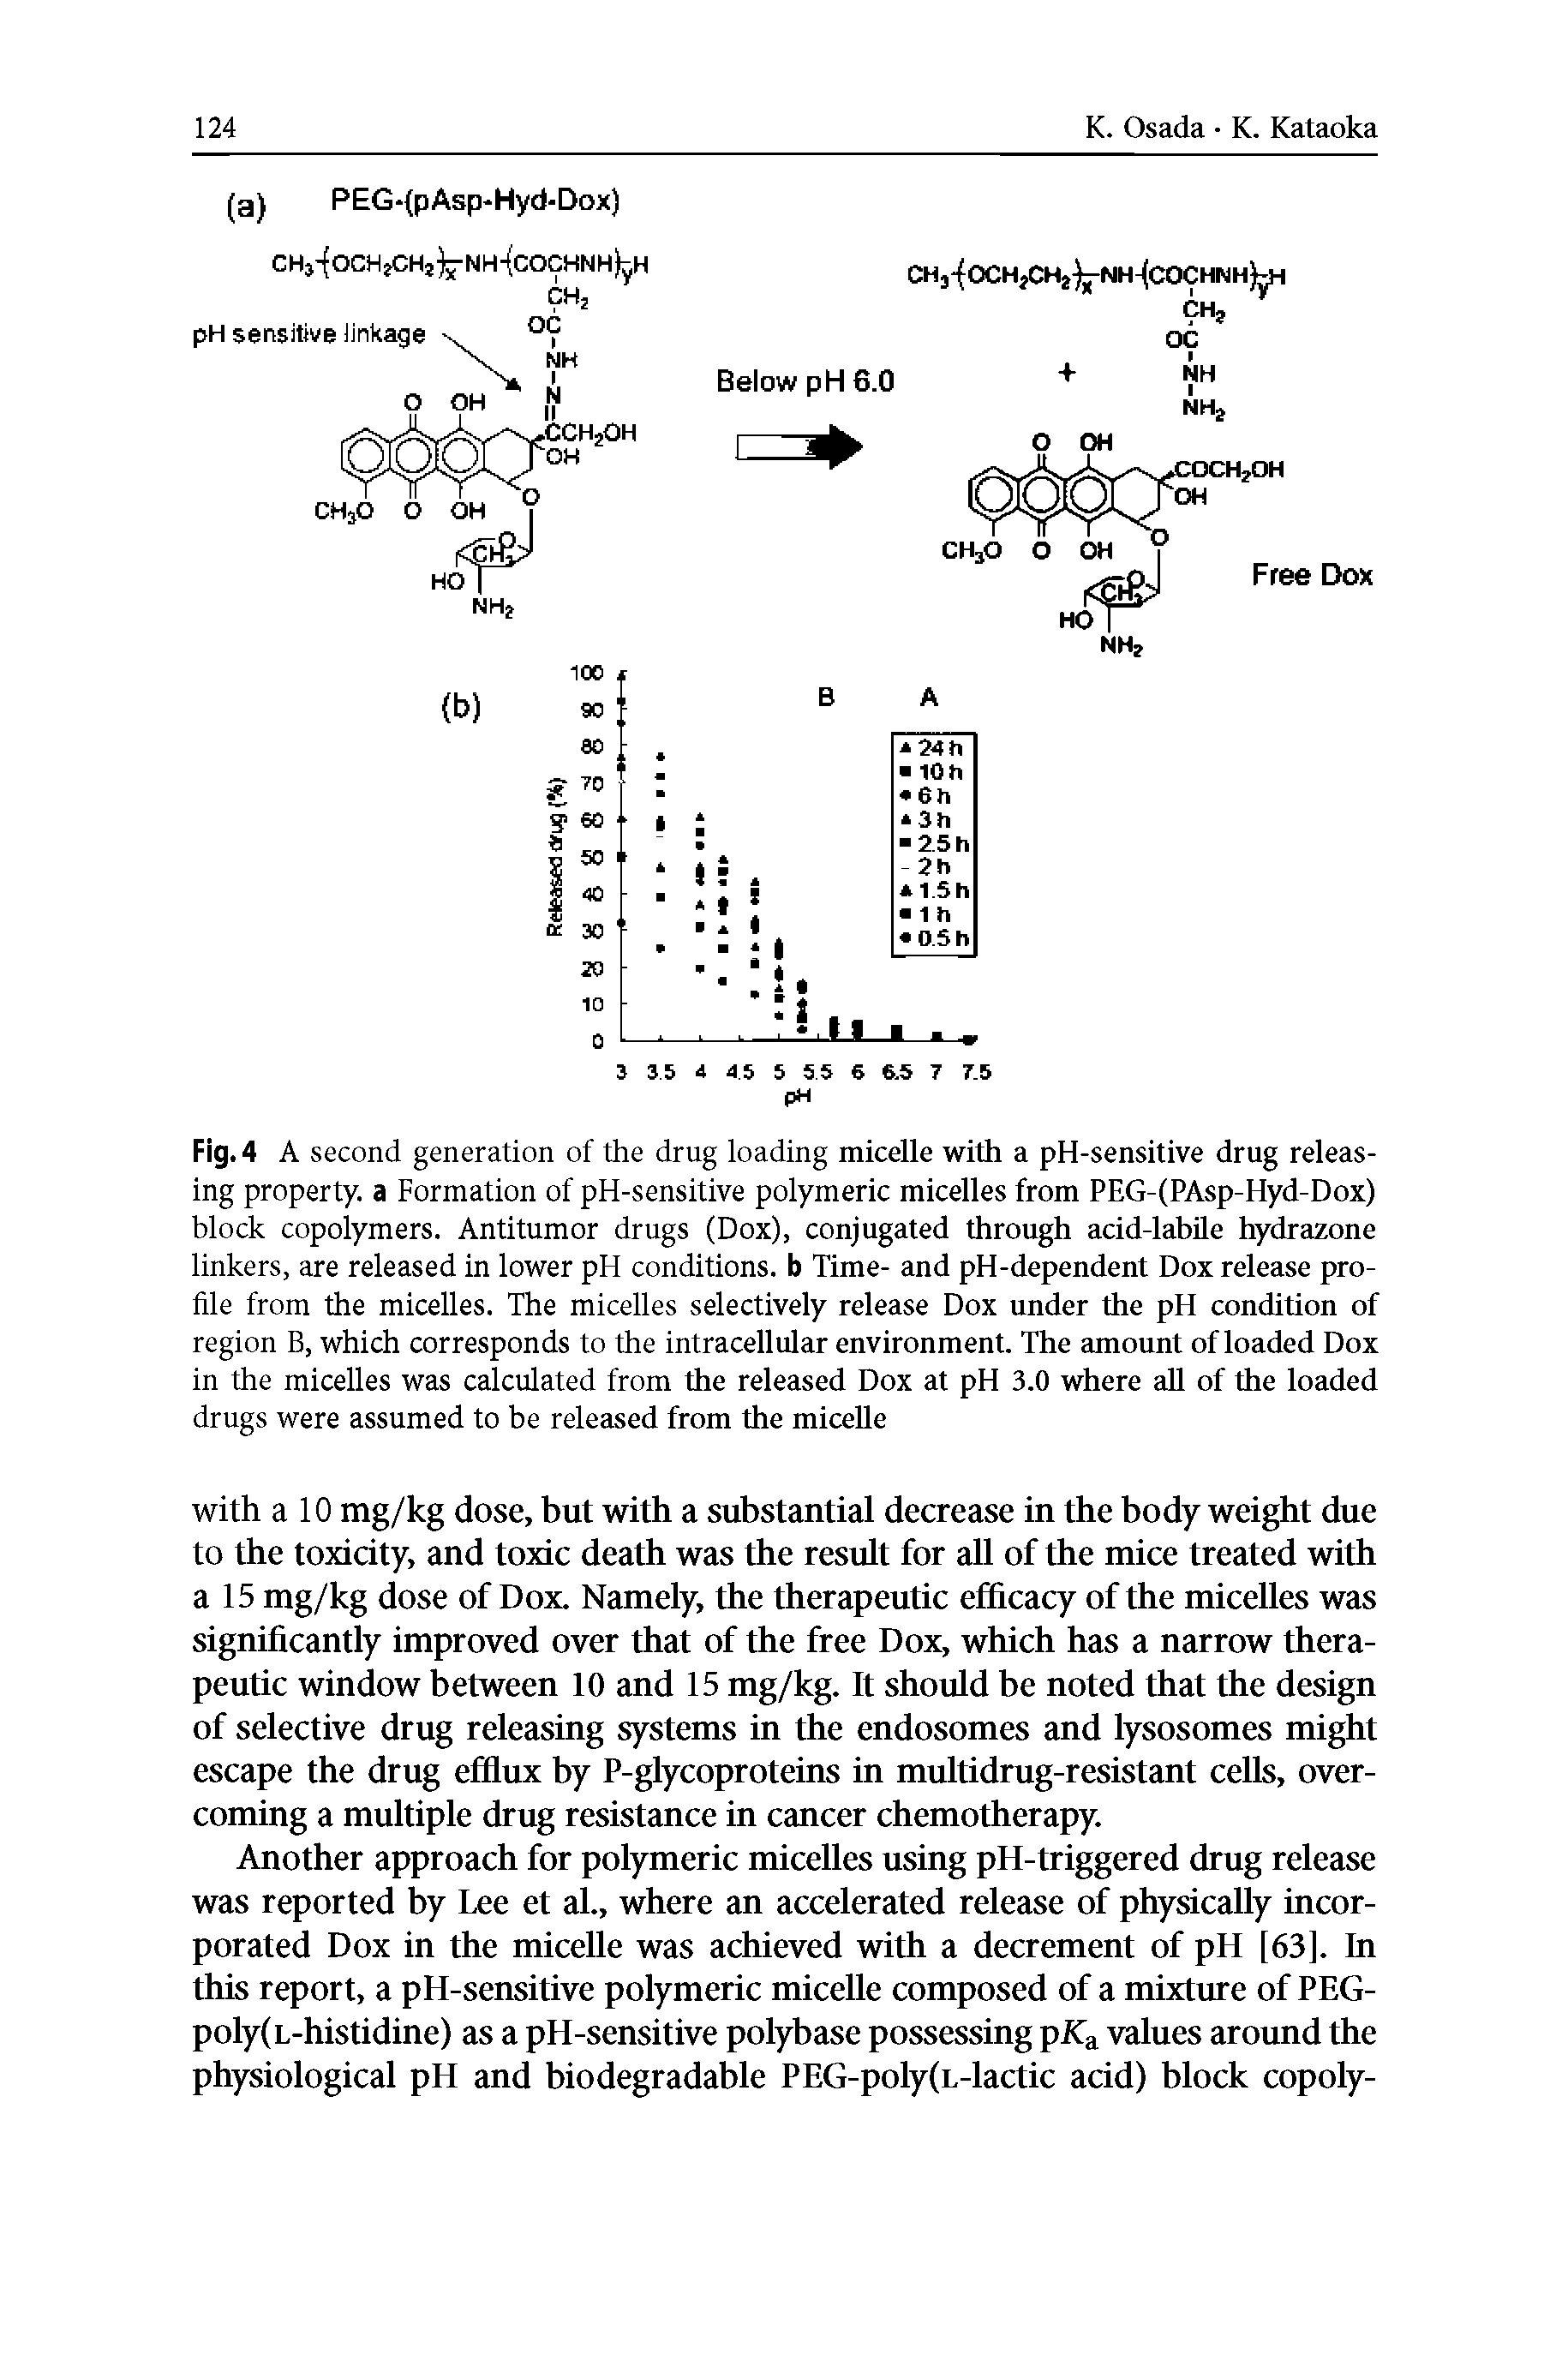 Fig. 4 A second generation of the drug loading micelle with a pH-sensitive drug releasing property, a Formation of pH-sensitive polymeric micelles from PEG-(PAsp-Hyd-Dox) block copolymers. Antitumor drugs (Dox), conjugated through acid-labile hydrazone linkers, are released in lower pH conditions, b Time- and pH-dependent Dox release profile from the micelles. The micelles selectively release Dox under the pH condition of region B, which corresponds to the intracellular environment. The amount of loaded Dox in the micelles was calculated from the released Dox at pH 3.0 where all of the loaded drugs were assumed to be released from the micelle...